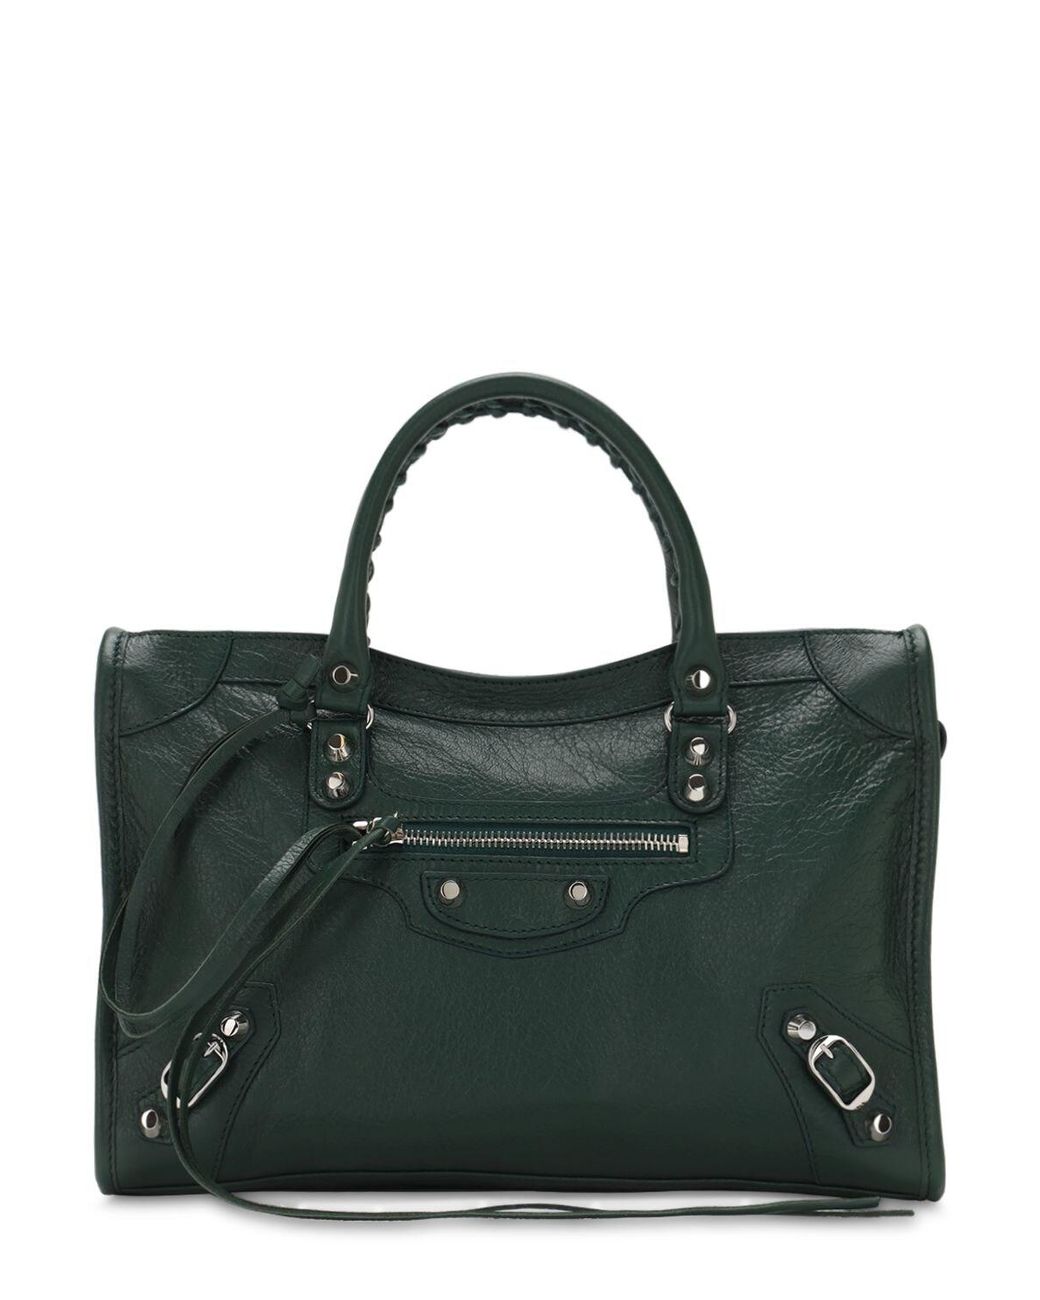 Balenciaga Sm Classic City Leather Top Handle Bag in Forest Green ...